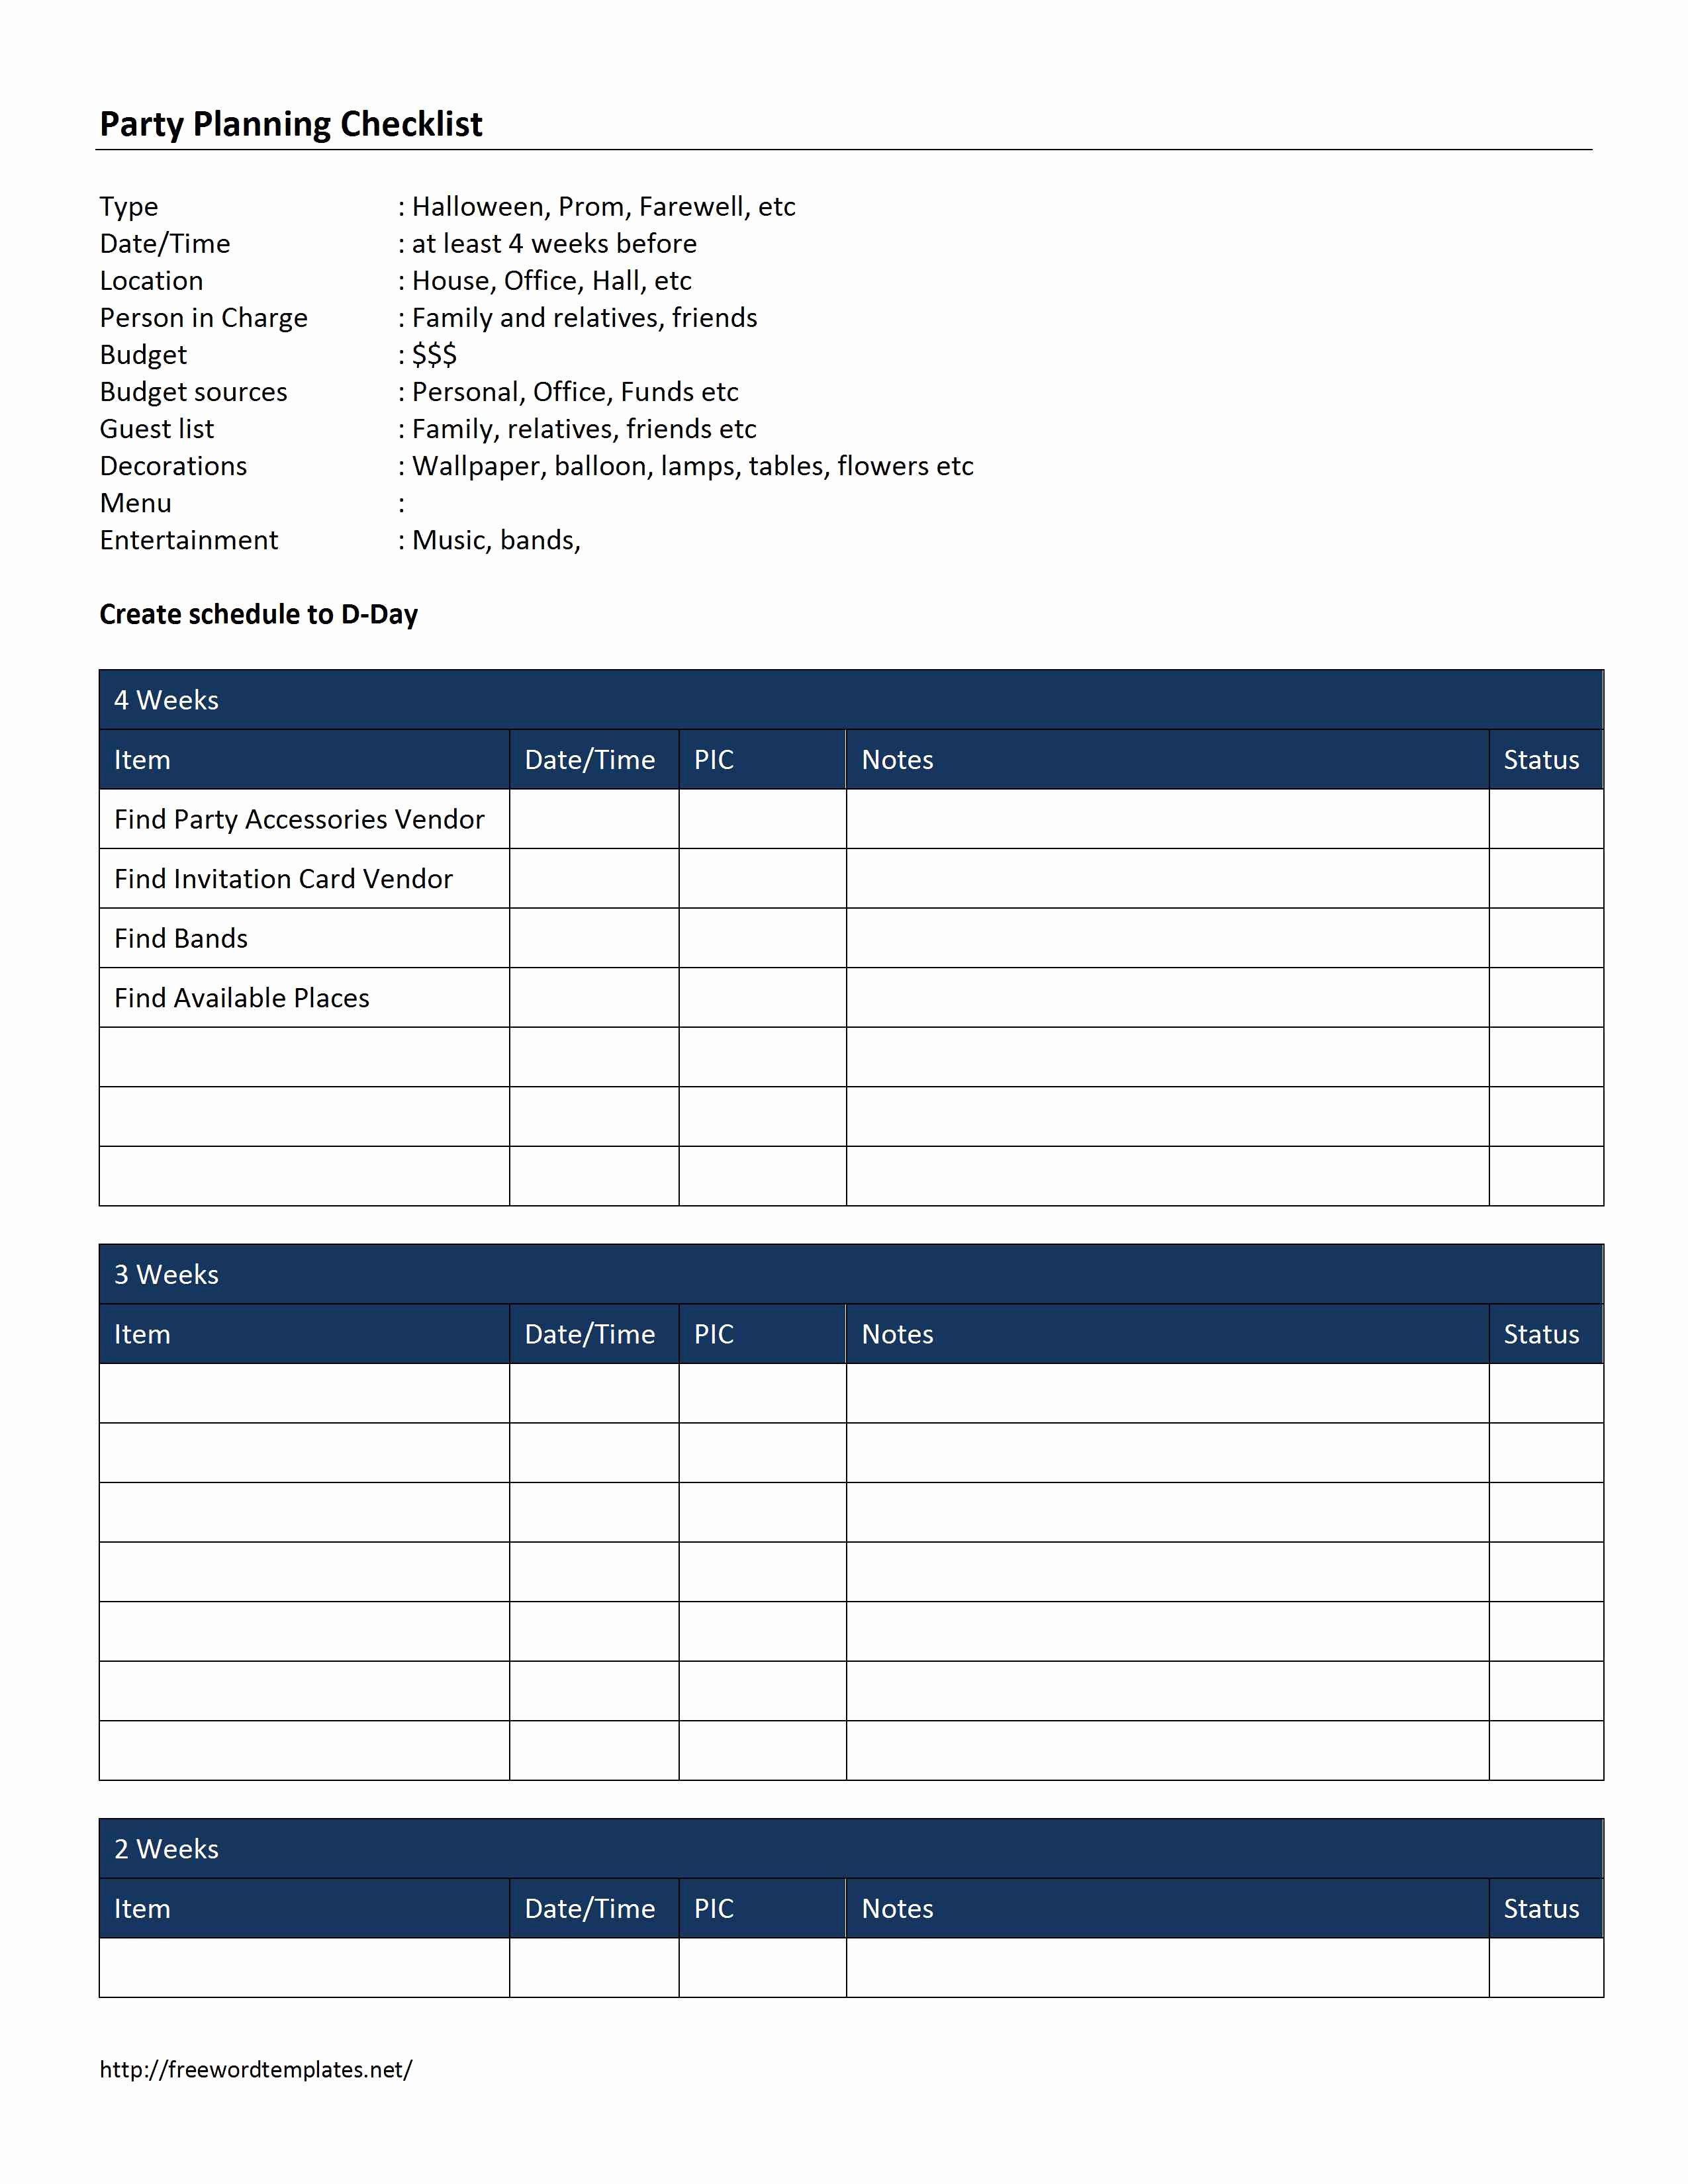 Event Planning Checklist Template Fresh Party Planning Checklist Template